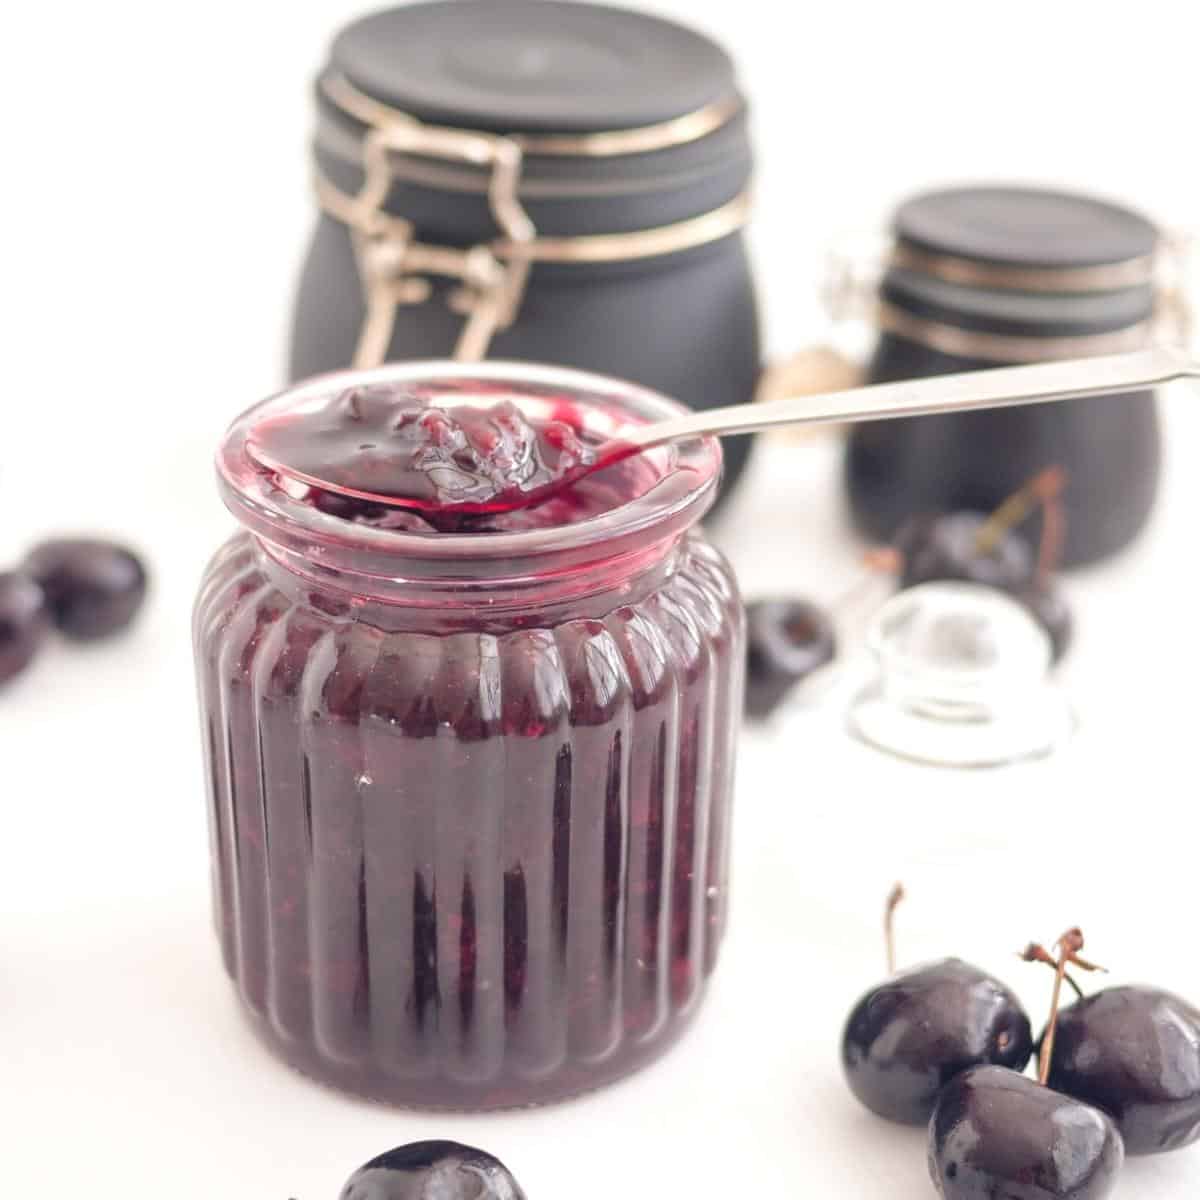 A mason jar with cherry filling.